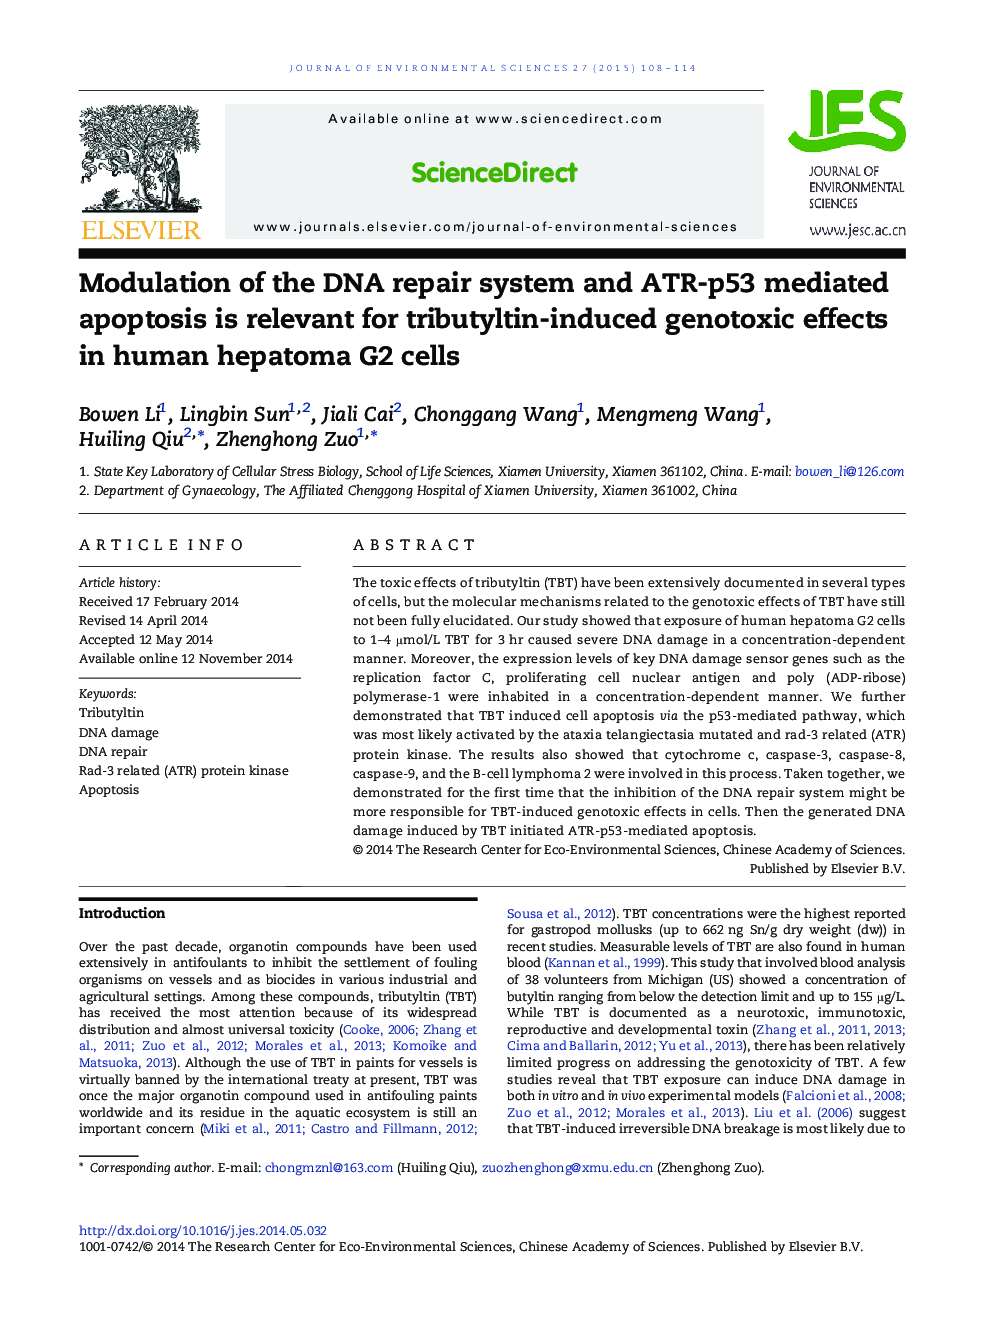 Modulation of the DNA repair system and ATR-p53 mediated apoptosis is relevant for tributyltin-induced genotoxic effects in human hepatoma G2 cells